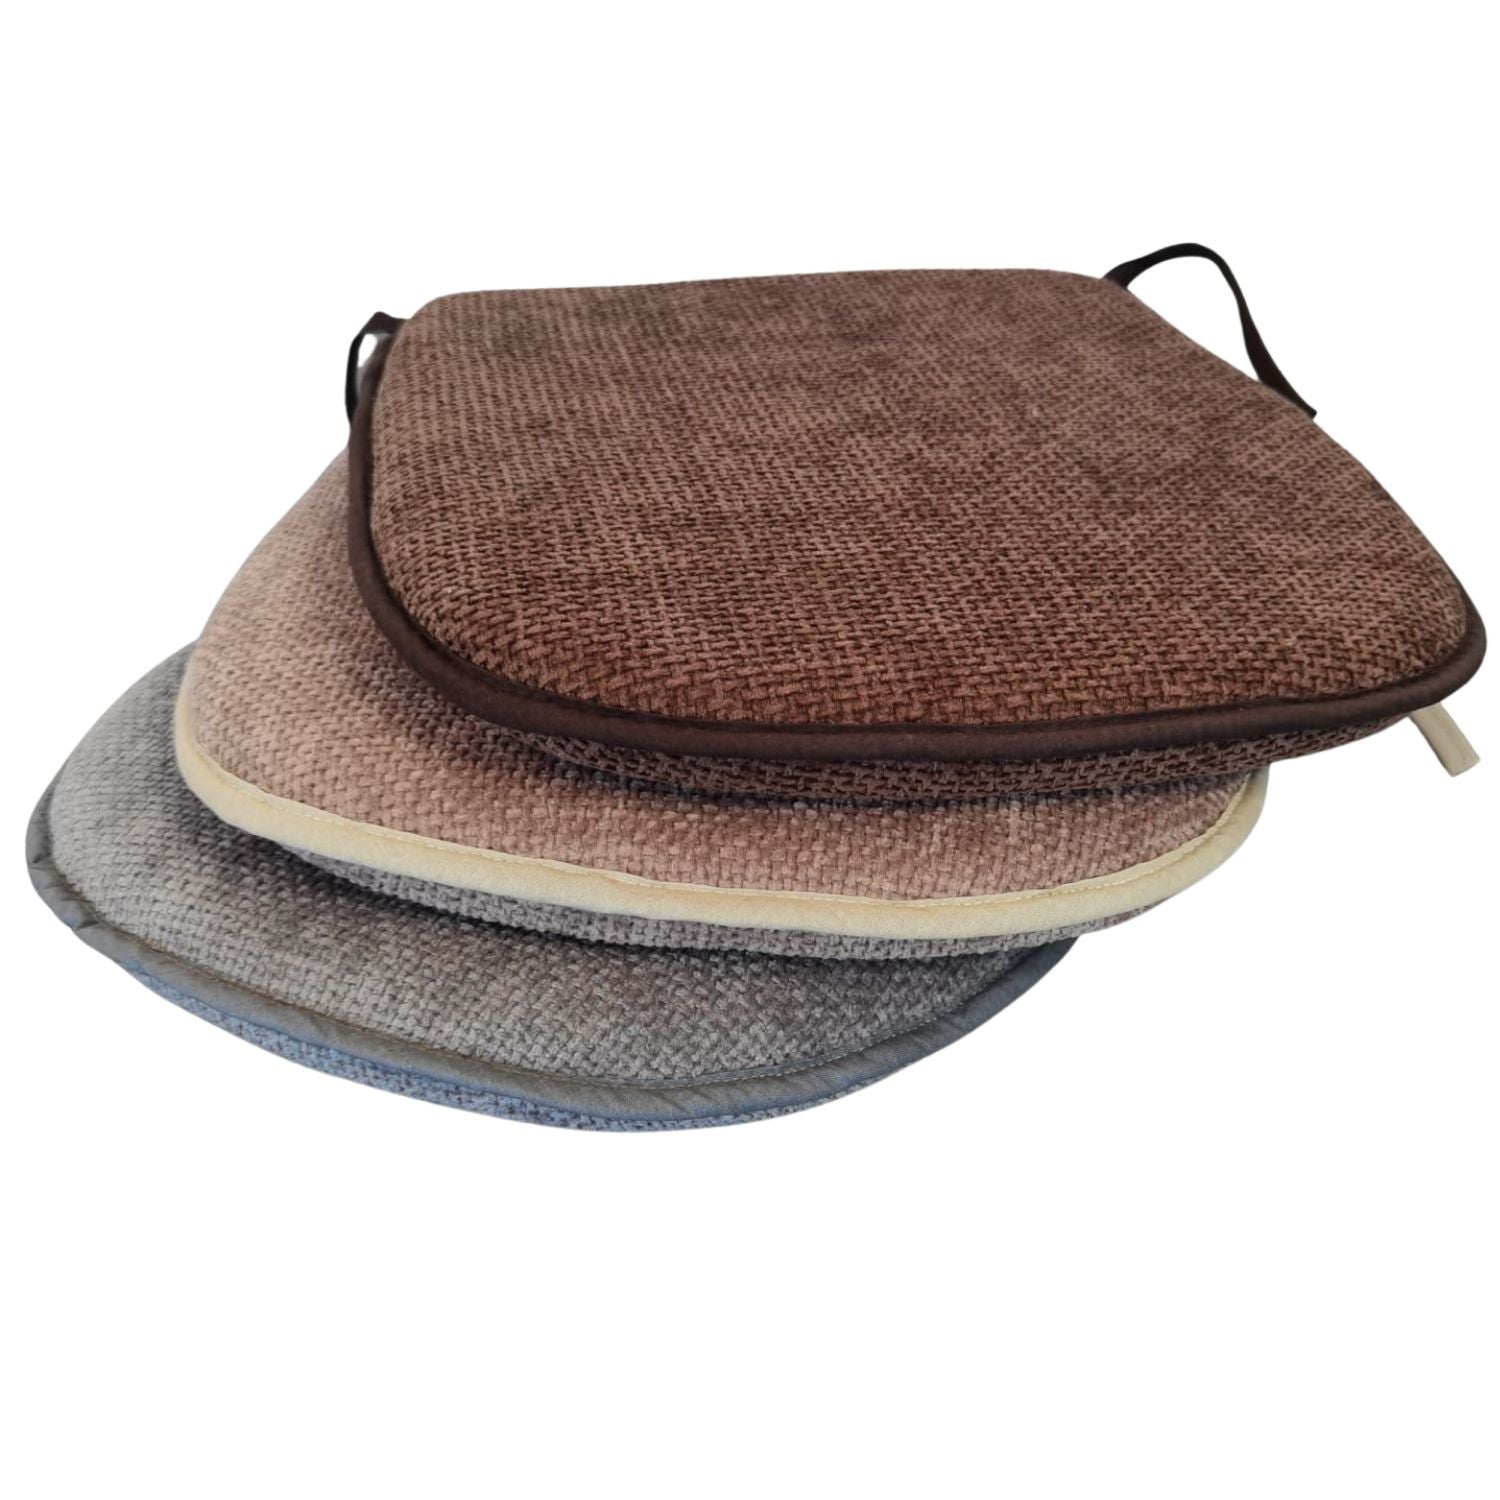 The Home Kitchen Chenille Chair Pad - Brown 5 Shaws Department Stores